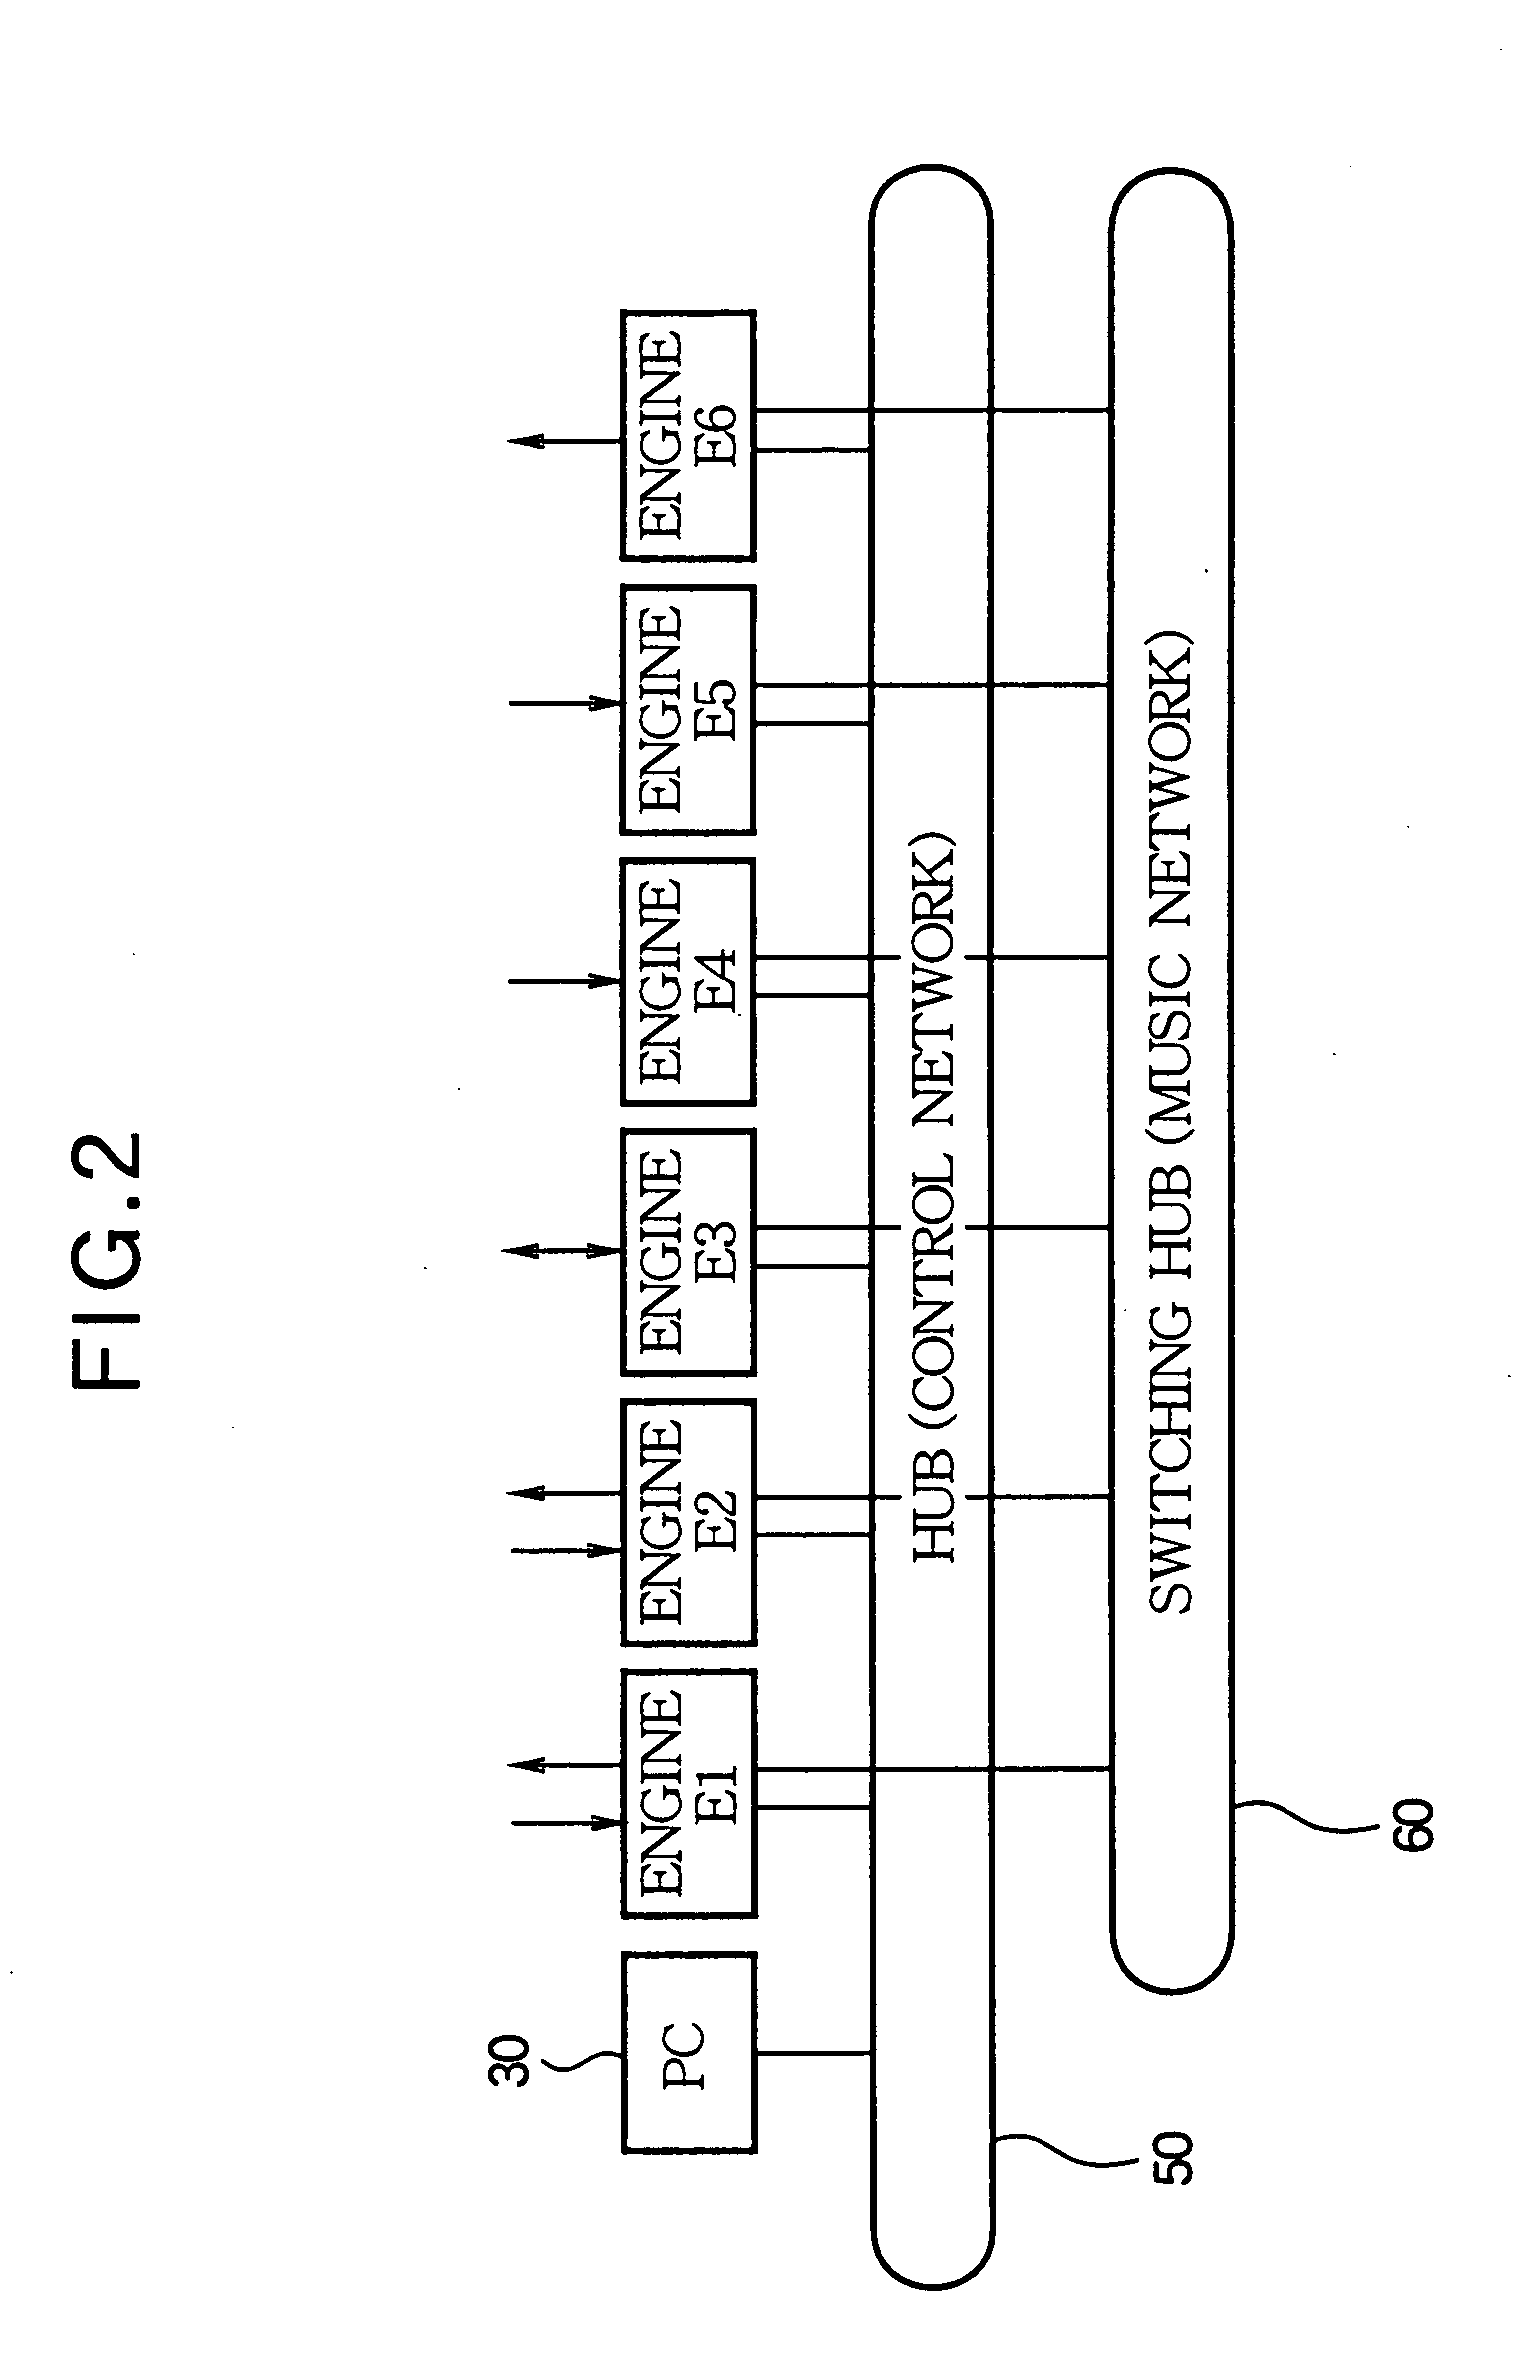 Parameter supply apparatus for audio mixing system